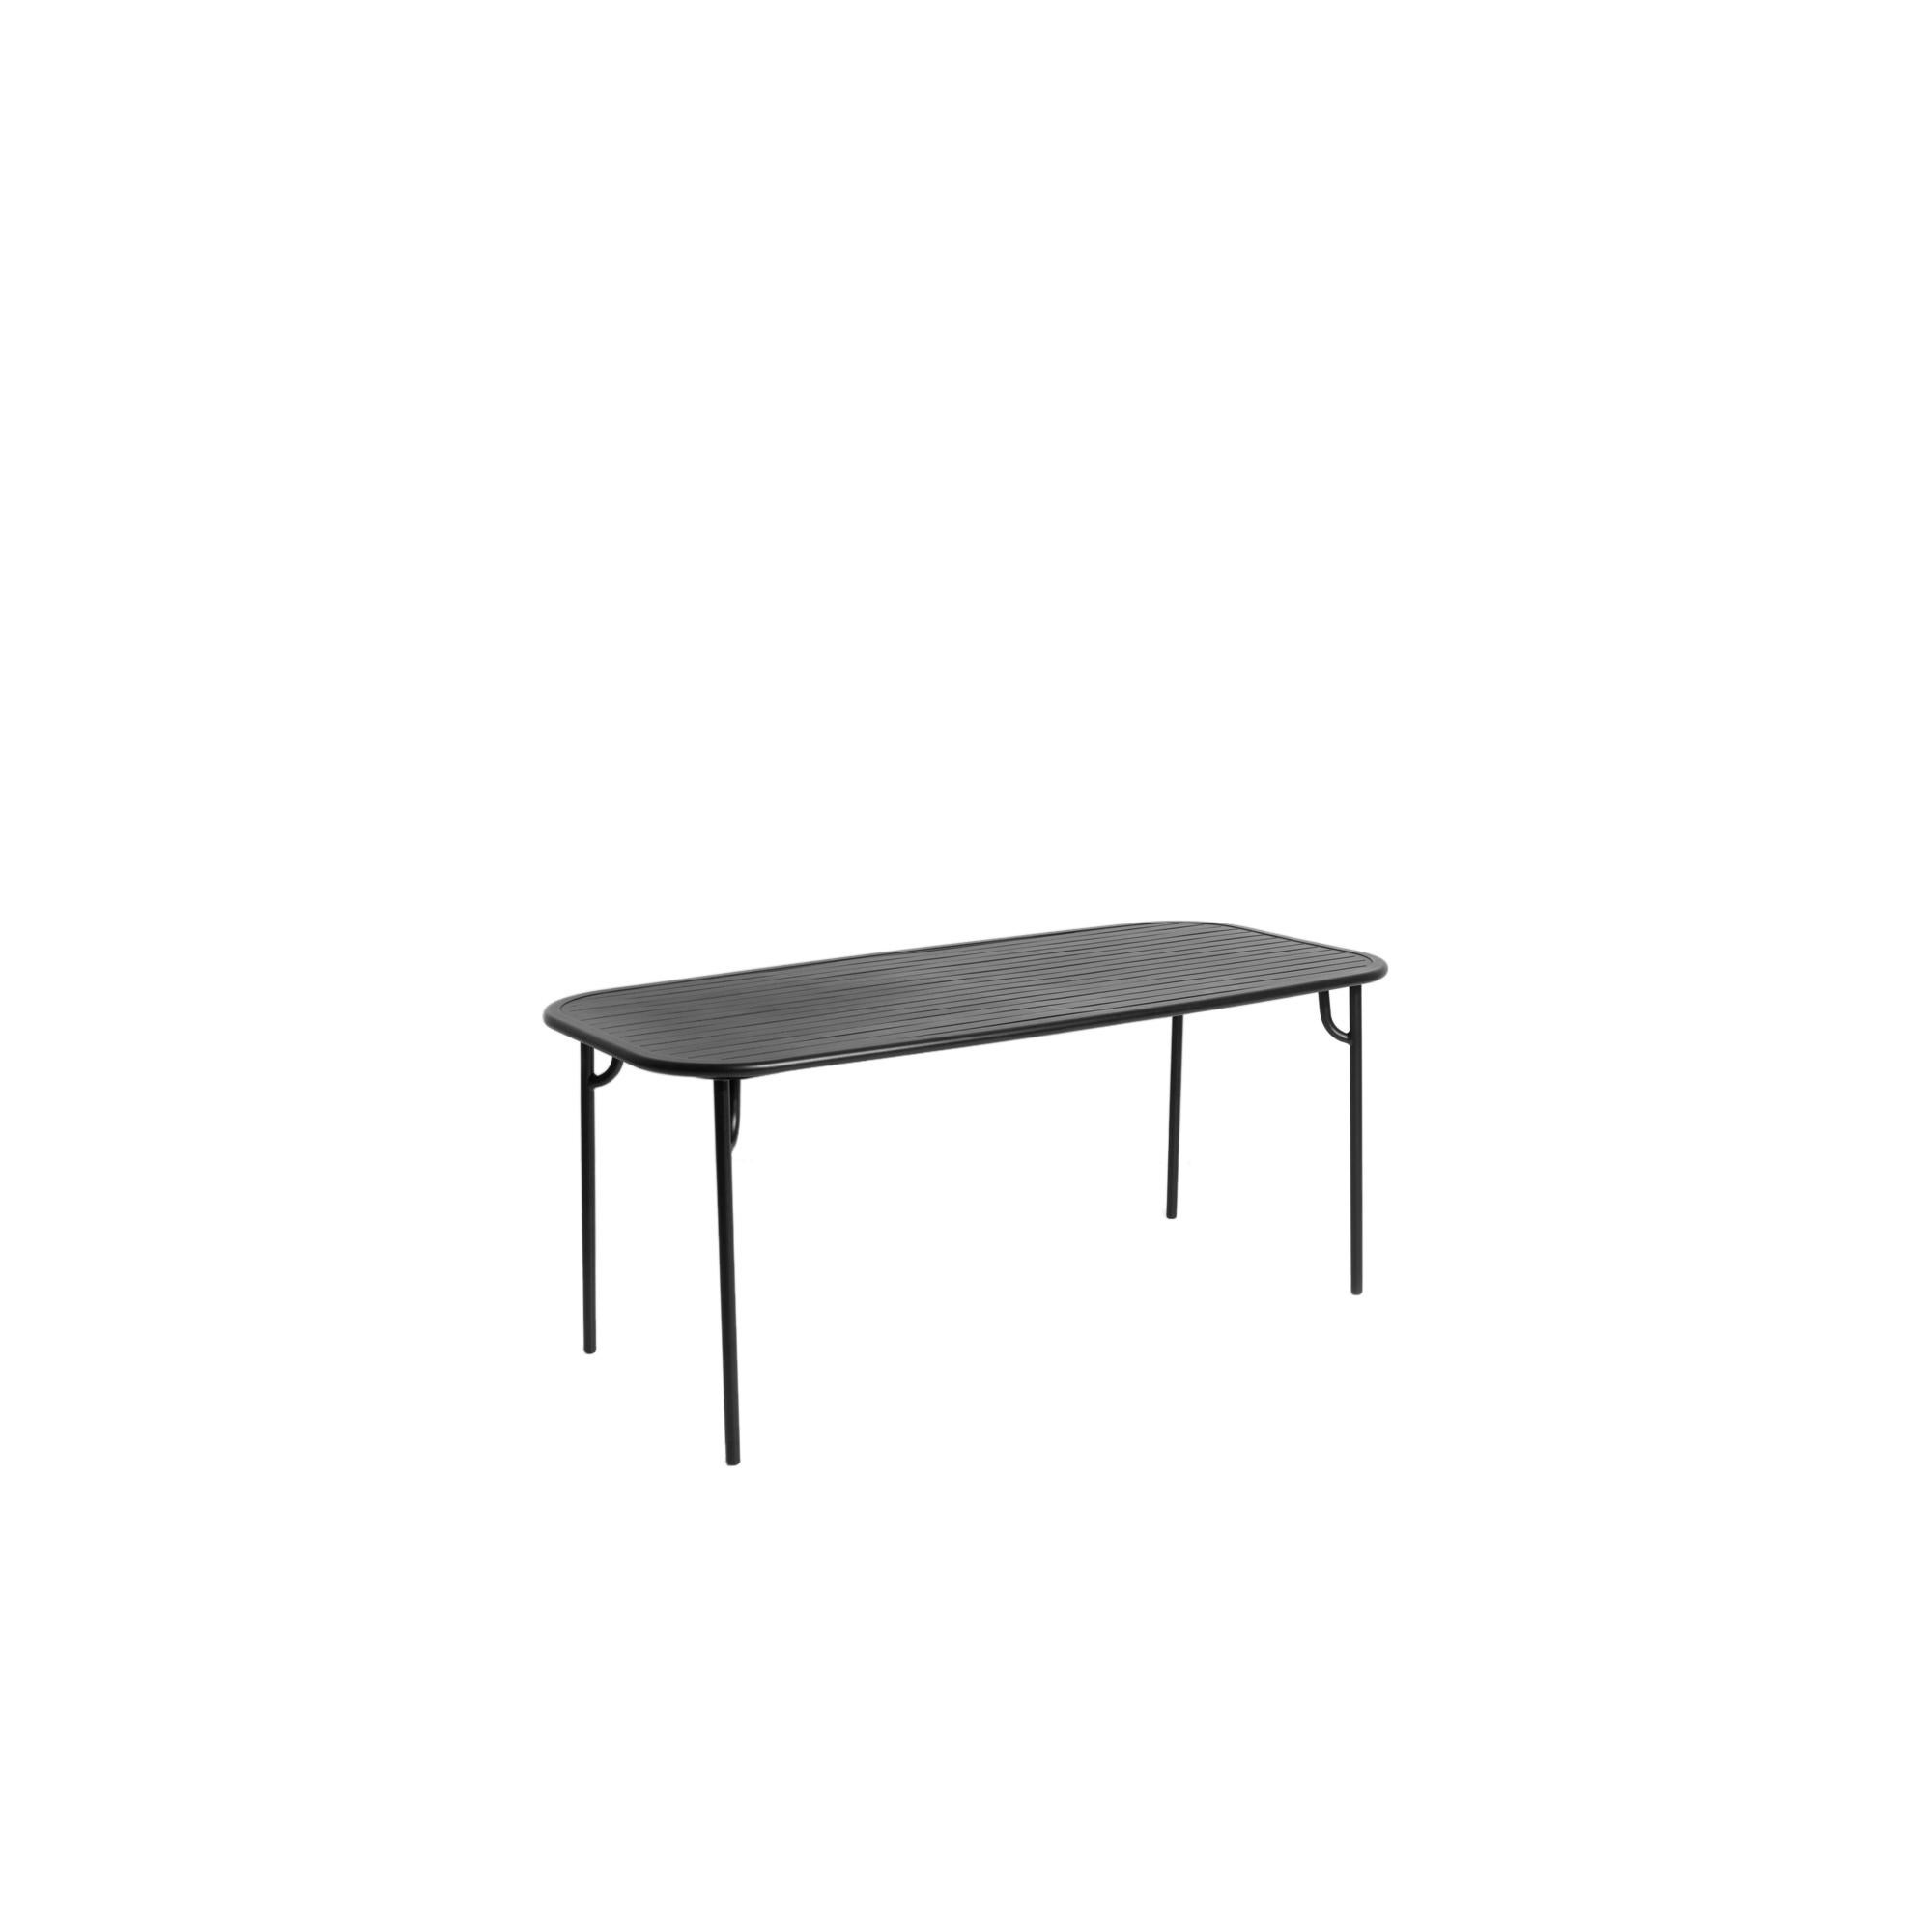 Petite Friture Week-End Medium Rectangular Dining Table in Black Aluminium with Slats by Studio BrichetZiegler, 2017

The week-end collection is a full range of outdoor furniture, in aluminium grained epoxy paint, matt finish, that includes 18